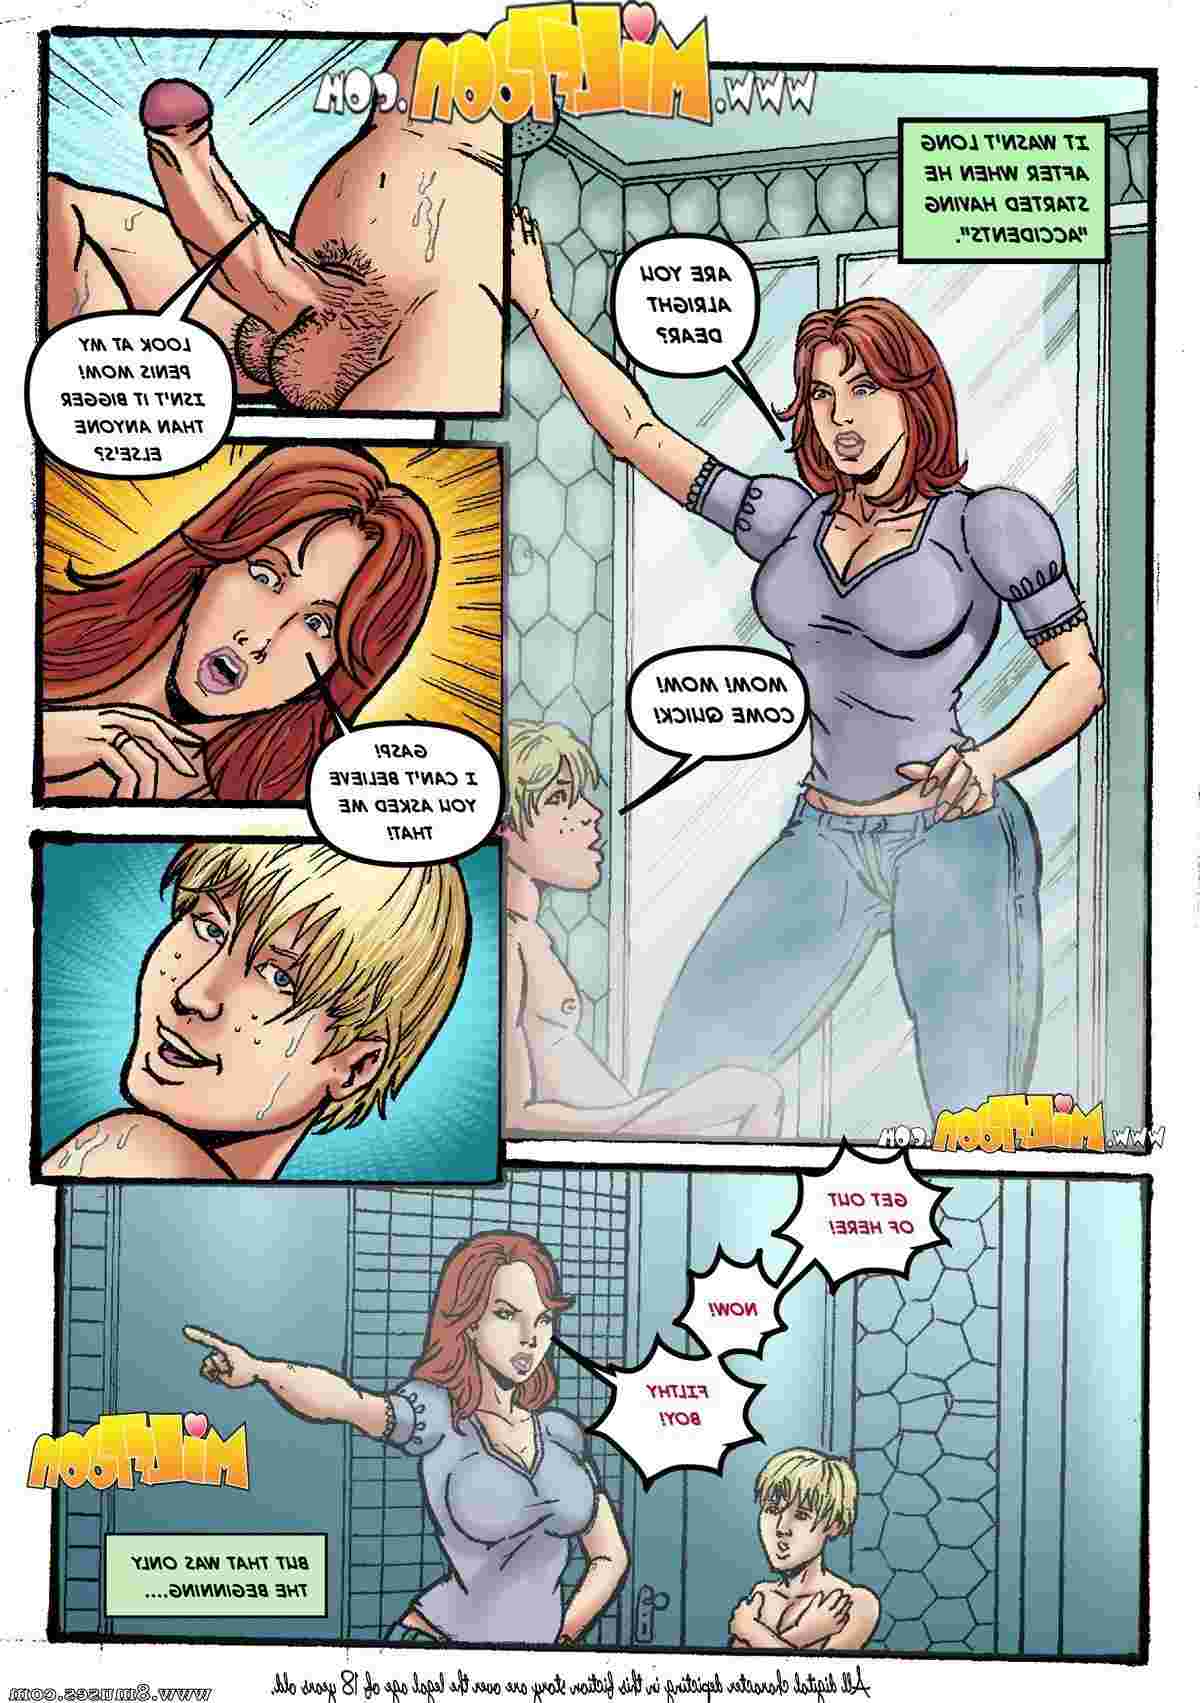 MilfToon-Comics/One-Day One_Day__8muses_-_Sex_and_Porn_Comics_2.jpg